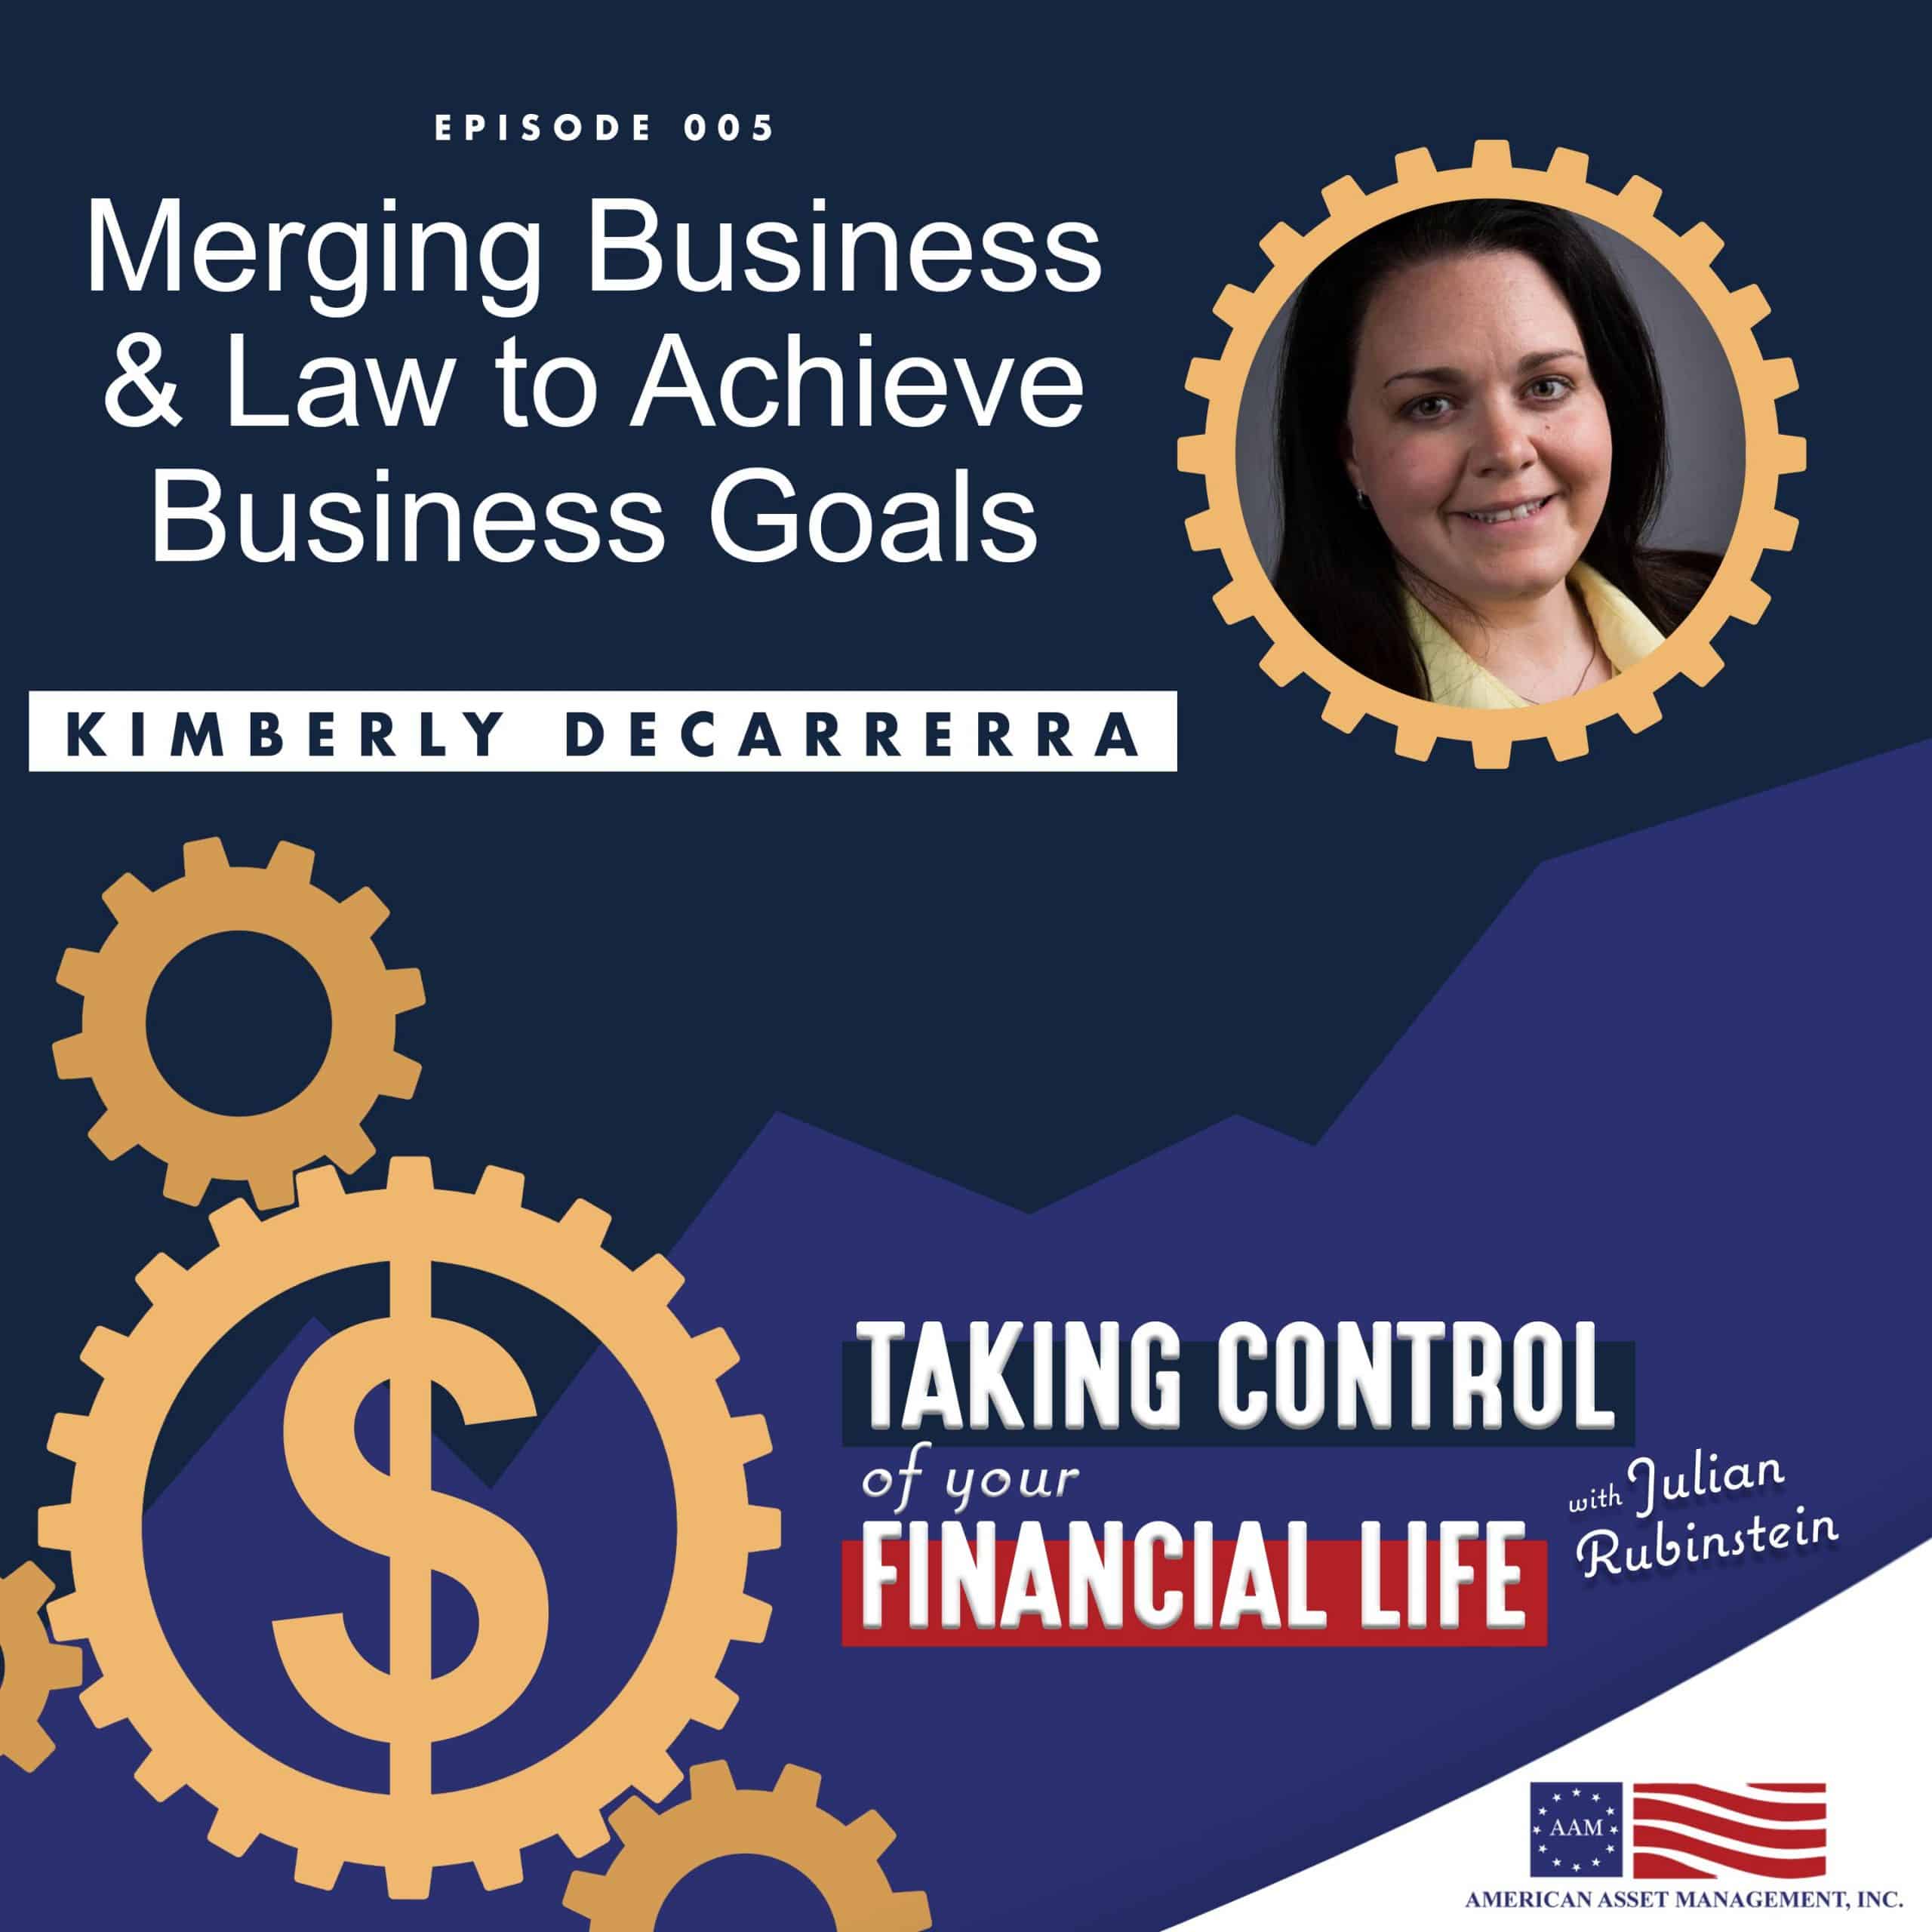 Merging Business & Law to Achieve Business Goals - Kimberly DeCarrera on Taking Control of your Financial Life with Julian Rubinstein